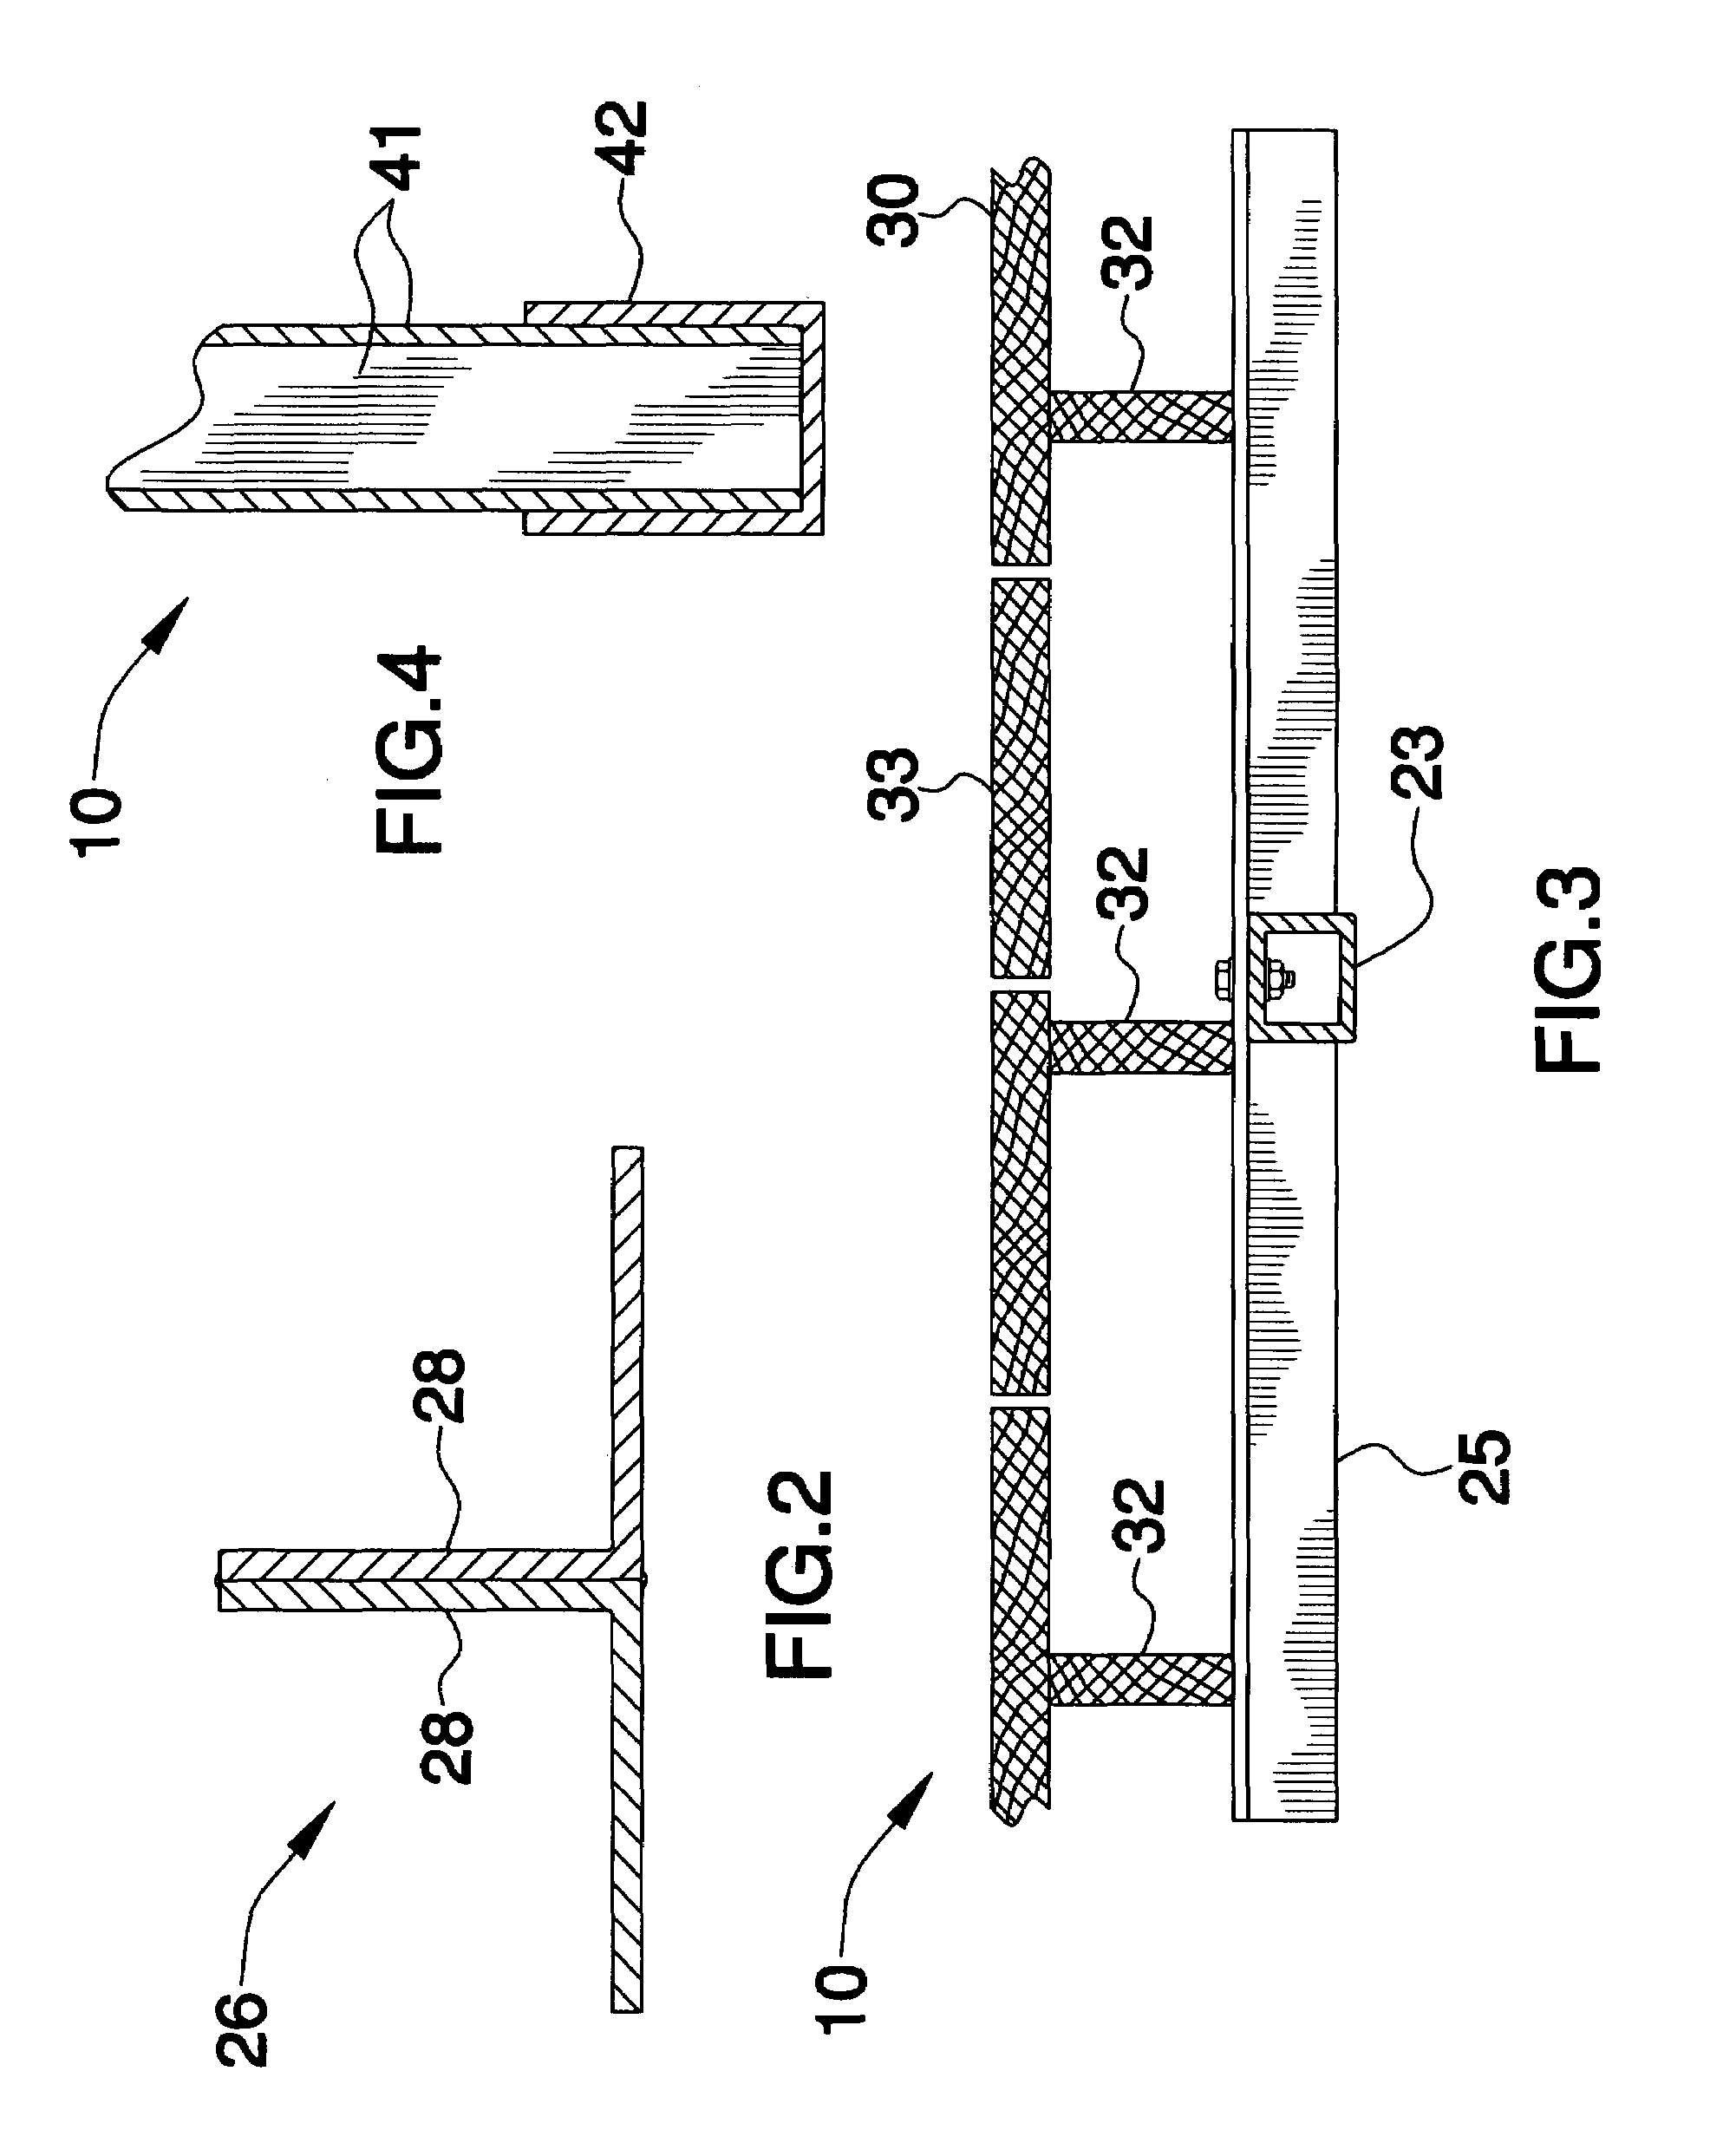 Outrigger assembly for supporting a platform adjacent a work area